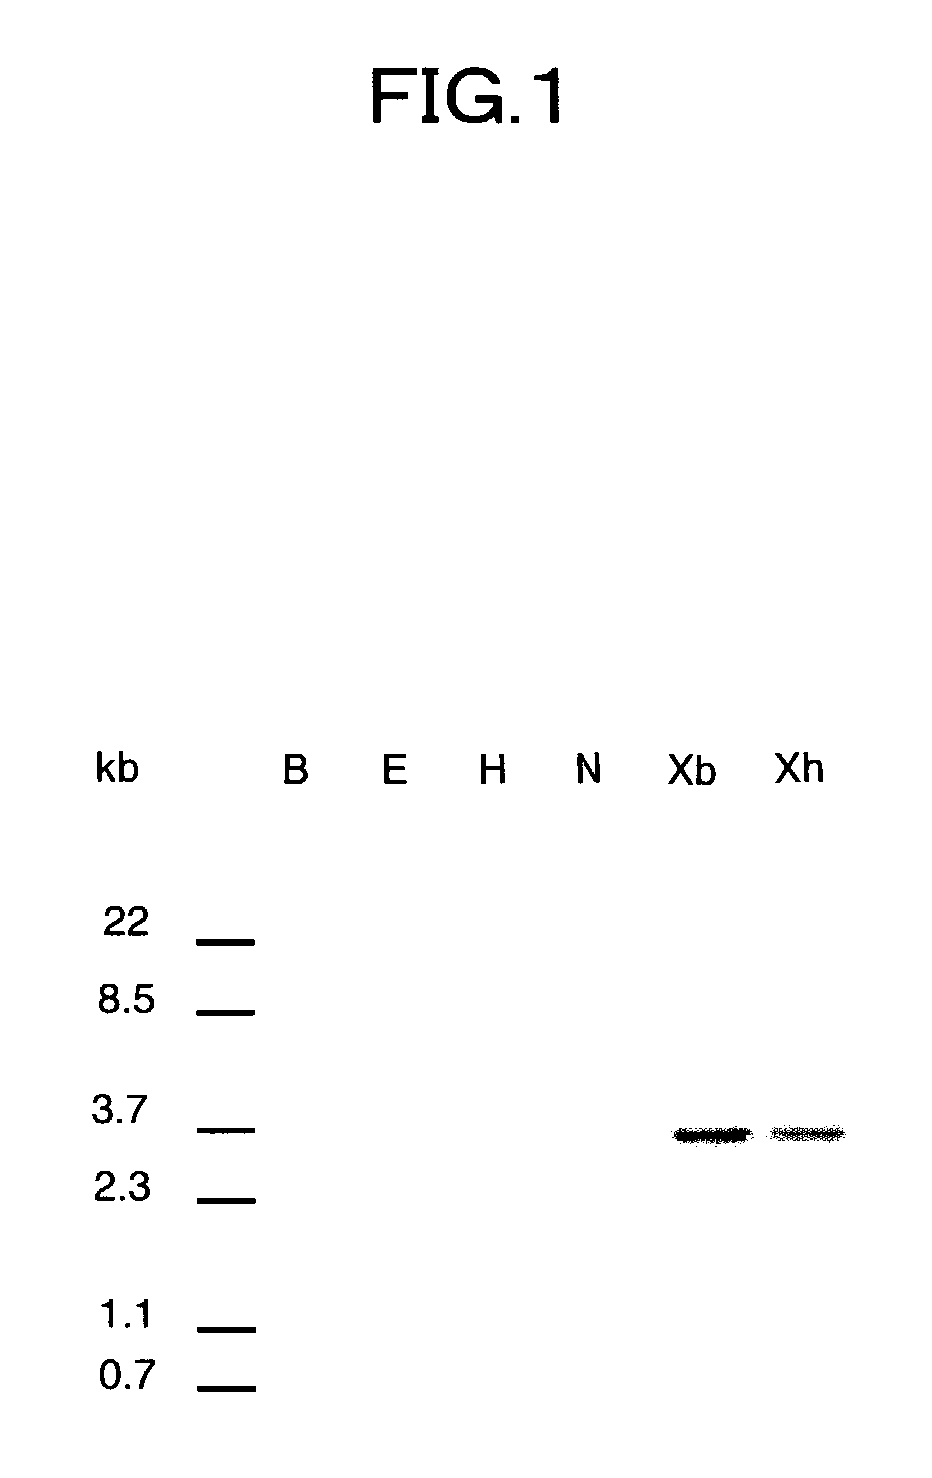 Flower-bud formation suppressor gene and early flowering plant